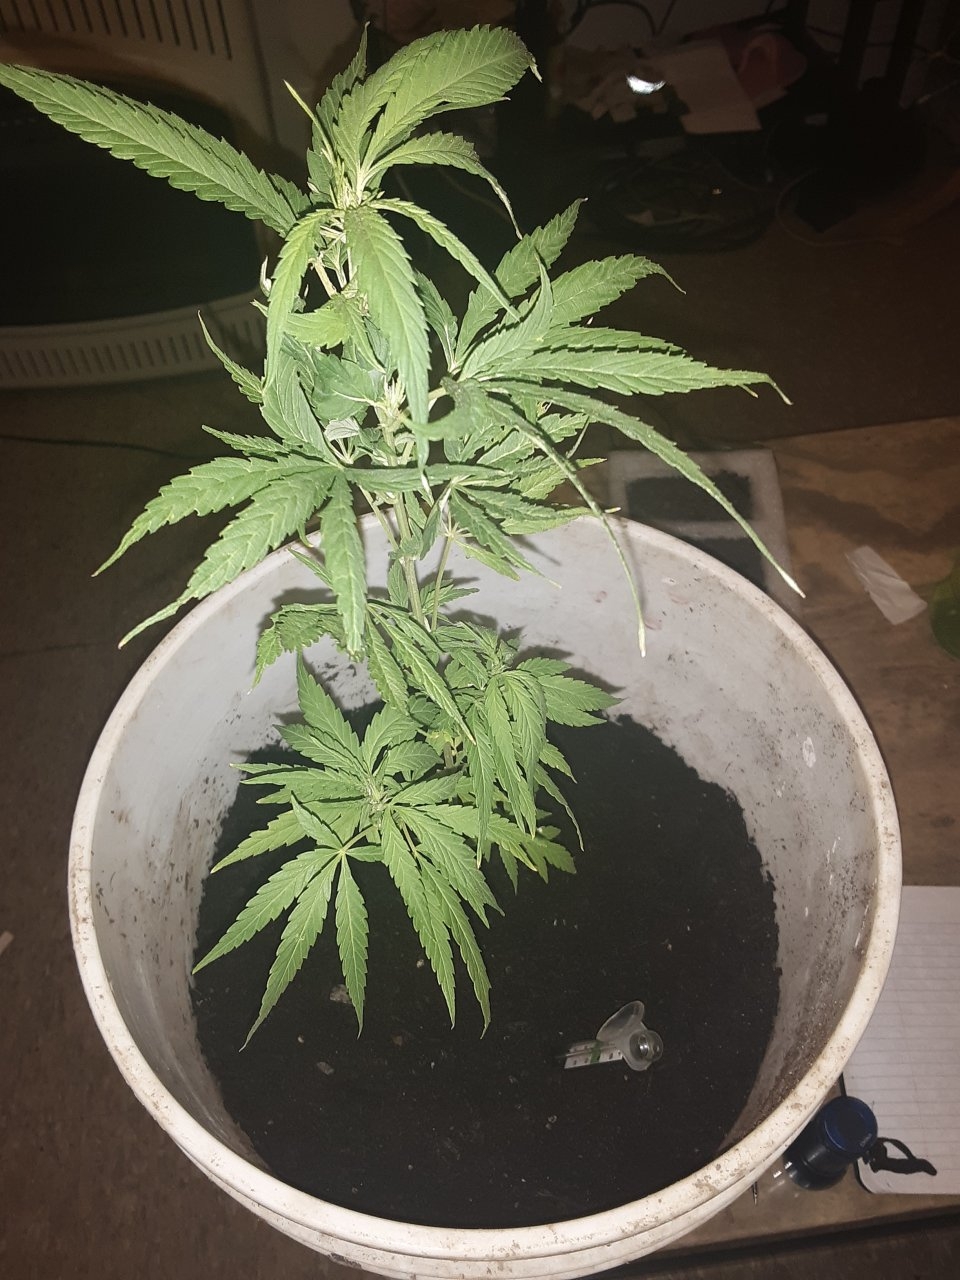 My first plant